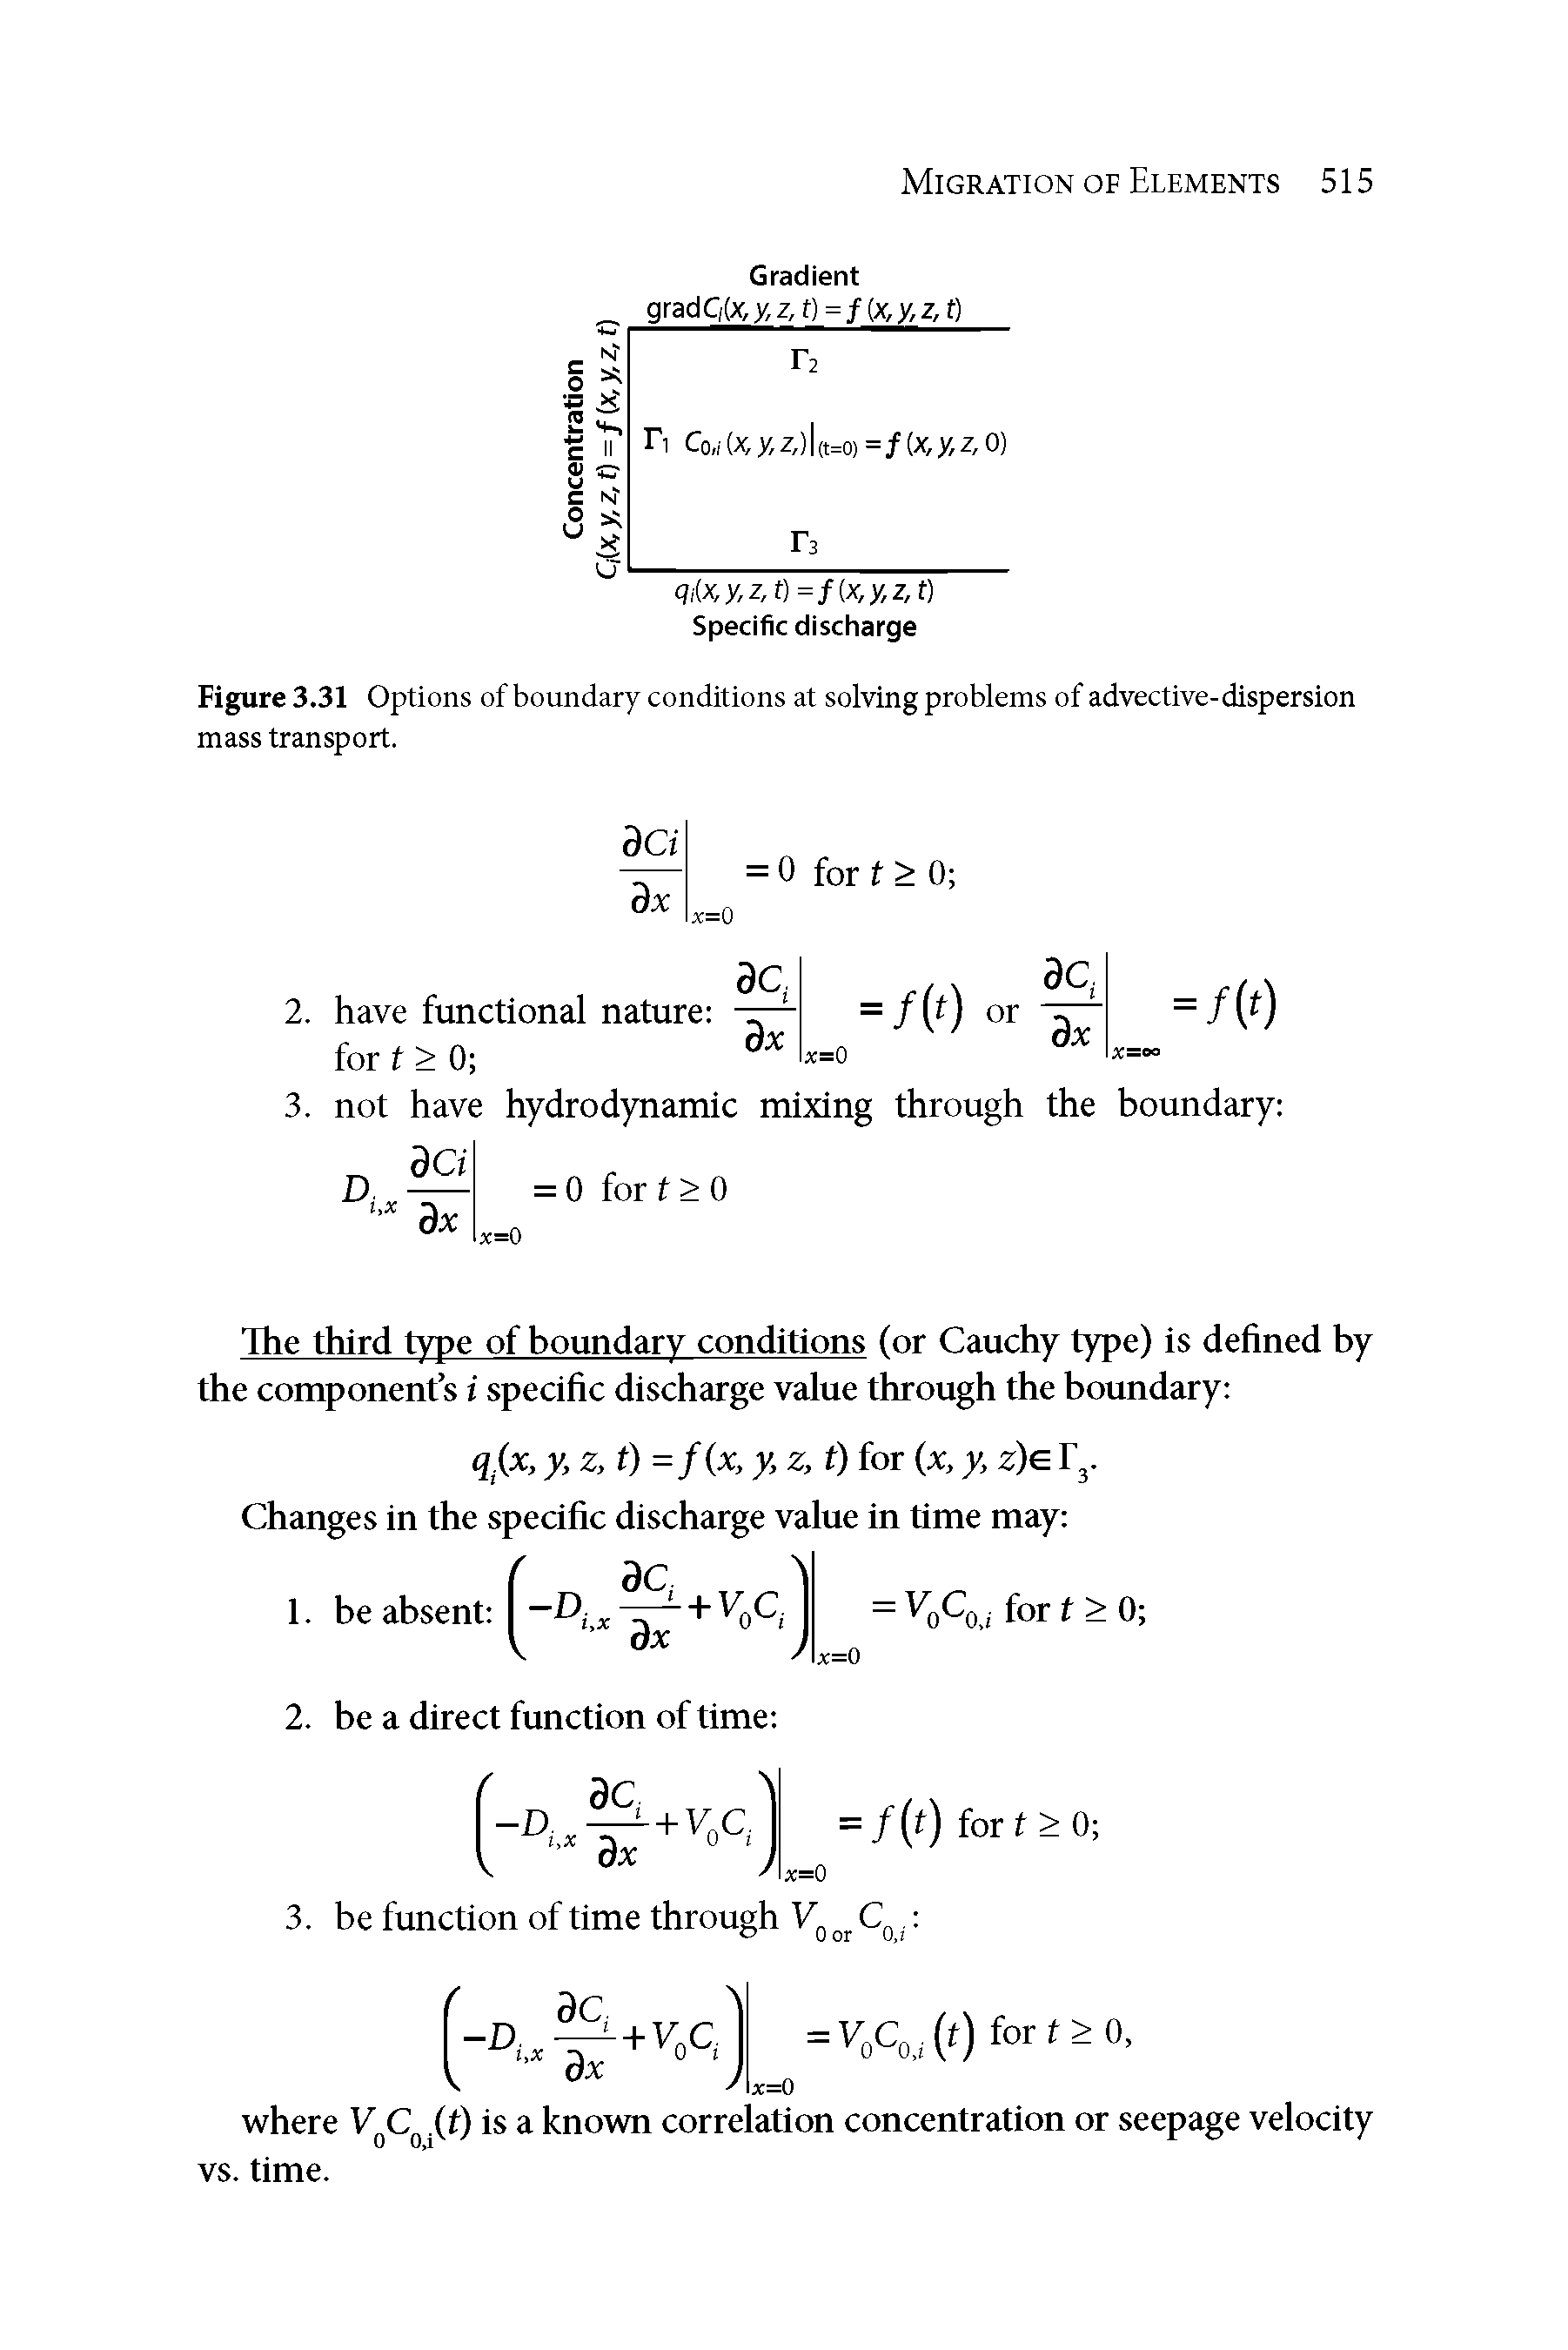 Figure 3.31 Options of boundary conditions at solving problems of advective-dispersion mass transport.